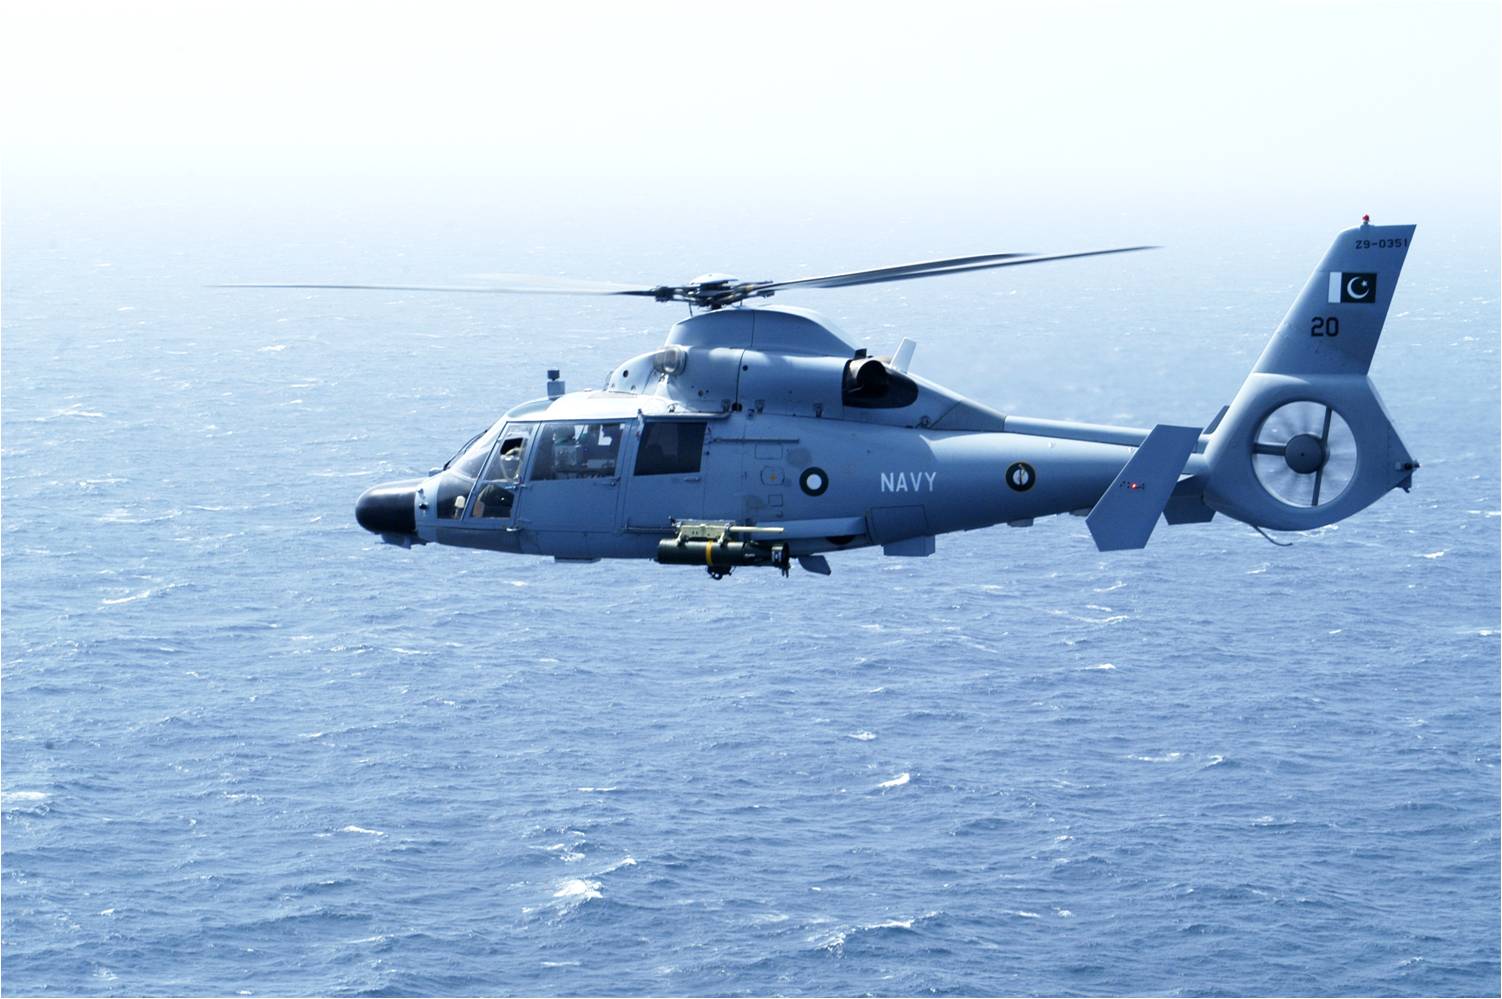 Crew member martyred as Pak Navy helicopter crashes in Arabian Sea